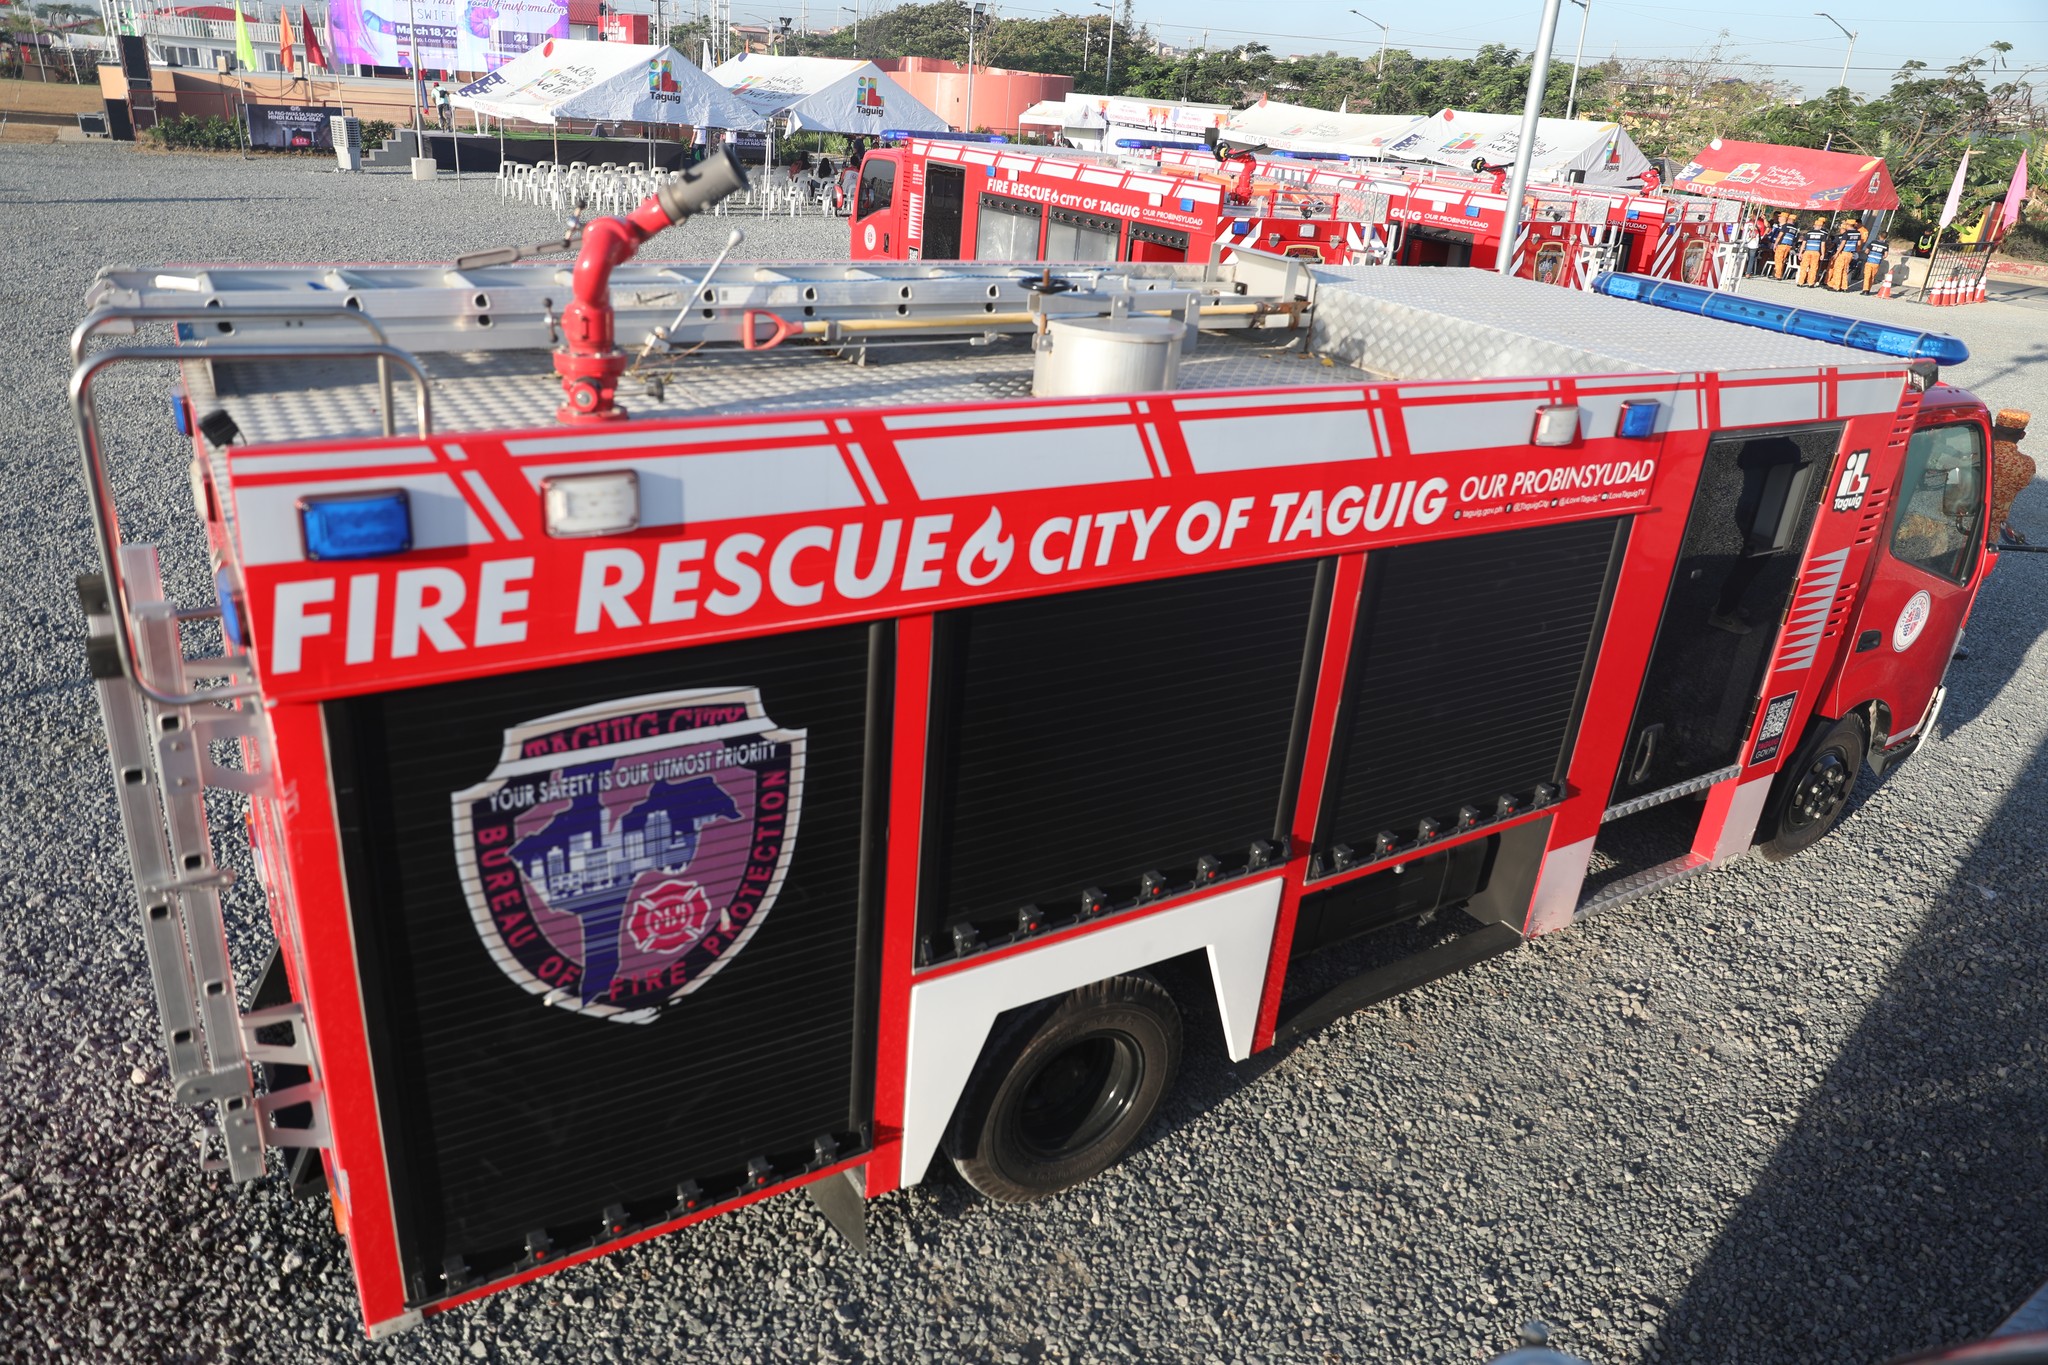 The Taguig City local government unit (LGU) handed over three fire trucks, eight motorcycles and other equipment to the Bureau of Fire Protection (BFP)-Taguig on Tuesday as part of its Fire Prevention Month campaign.